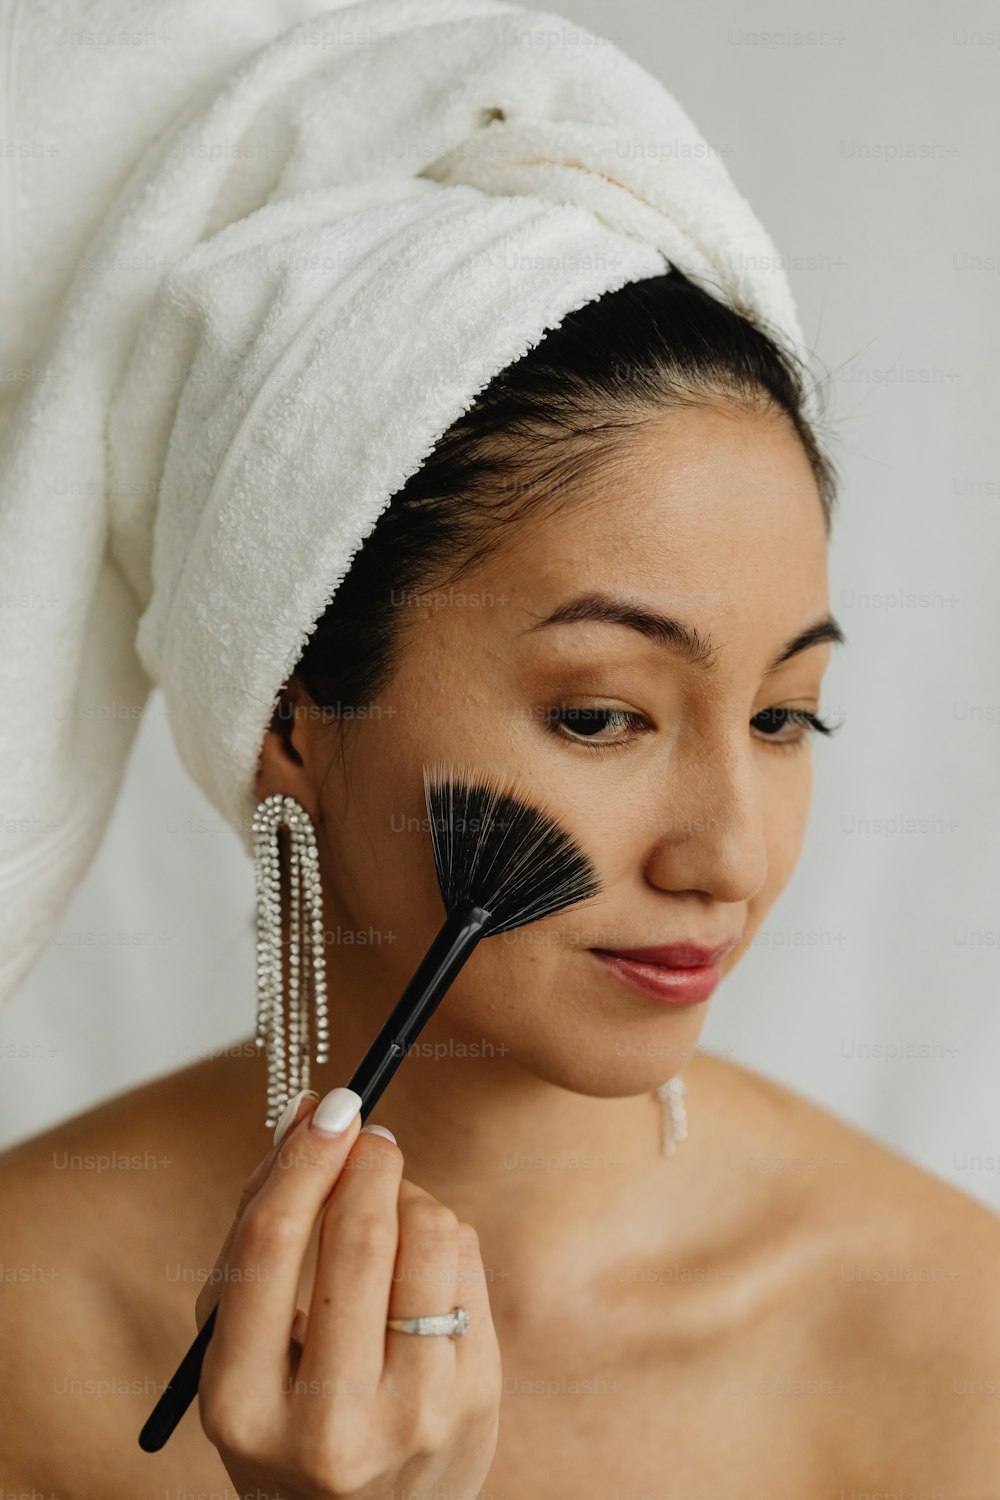 a woman with a towel on her head holding a brush